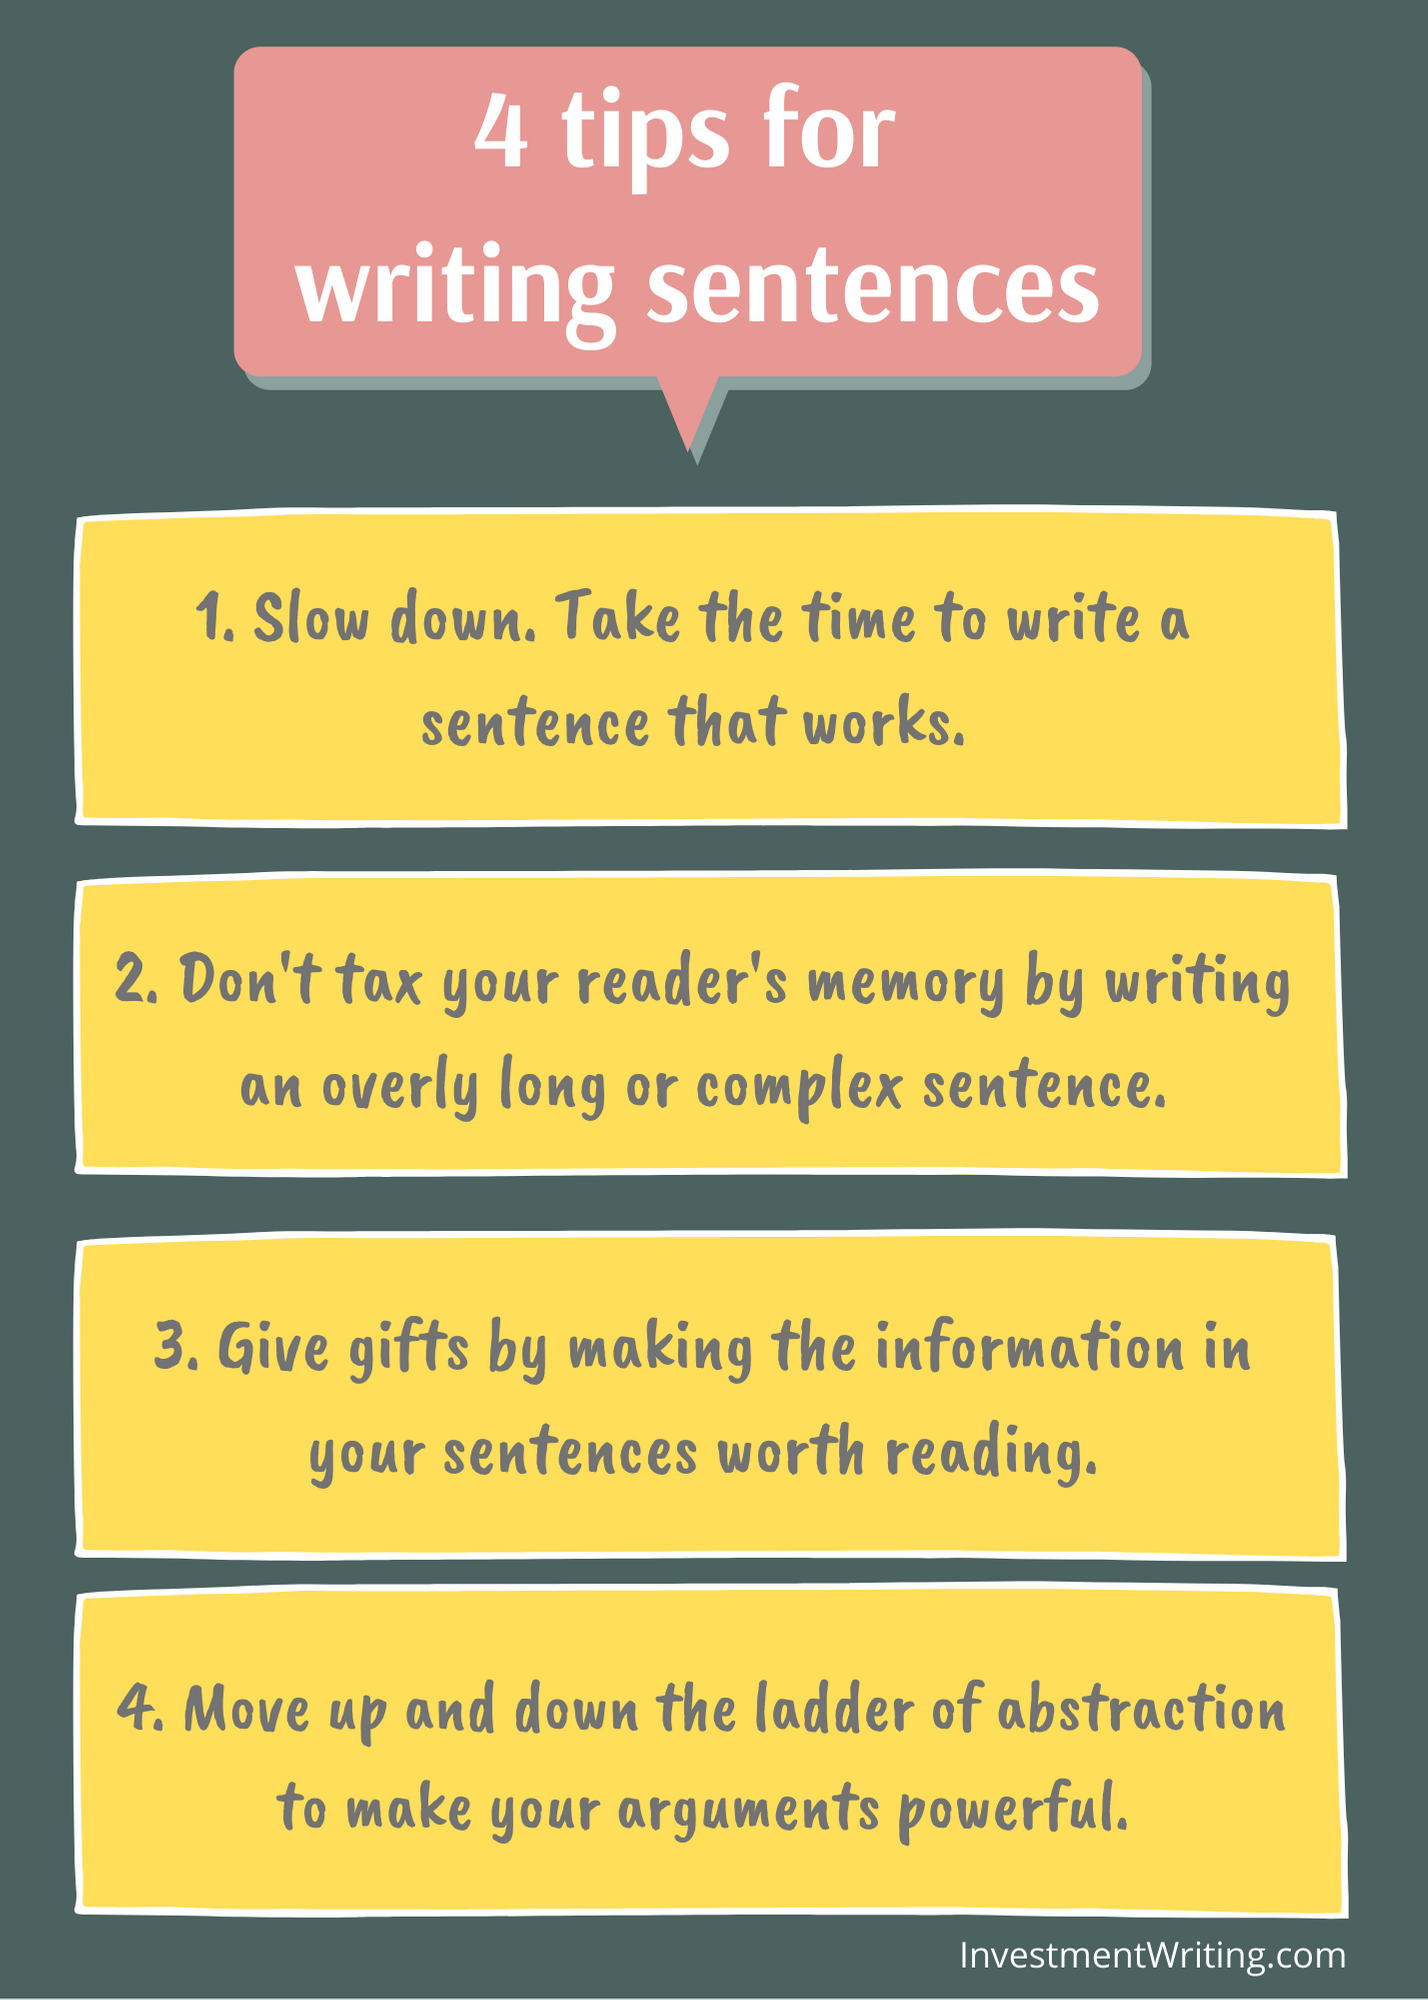 4-great-tips-for-writing-sentences-susan-weiner-s-blog-on-investment-writing